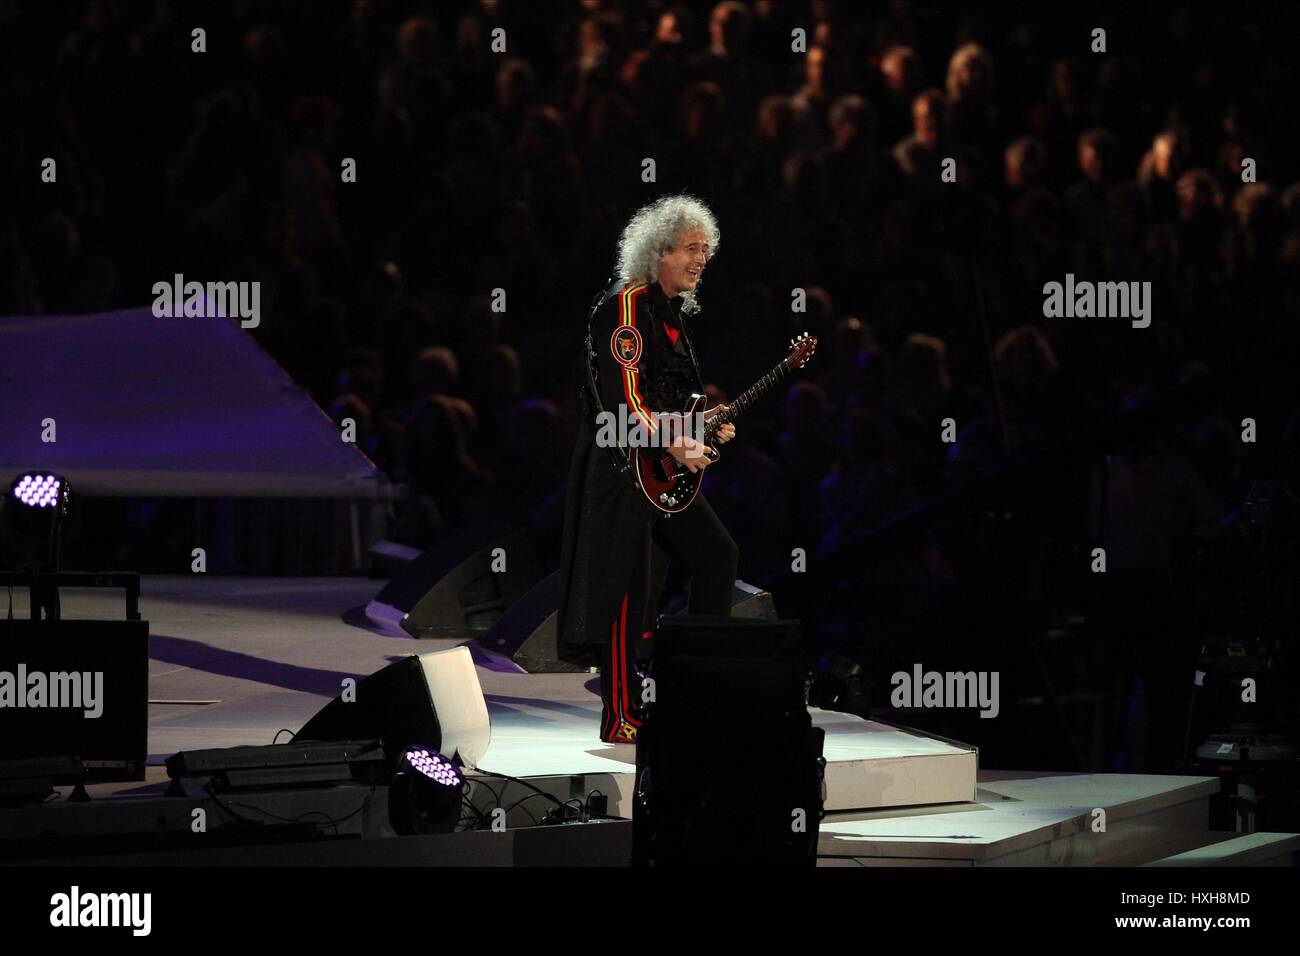 BRIAN MAY QUEEN QUEEN STRATFORD LONDON ENGLAND 12 August 2012 Stock Photo